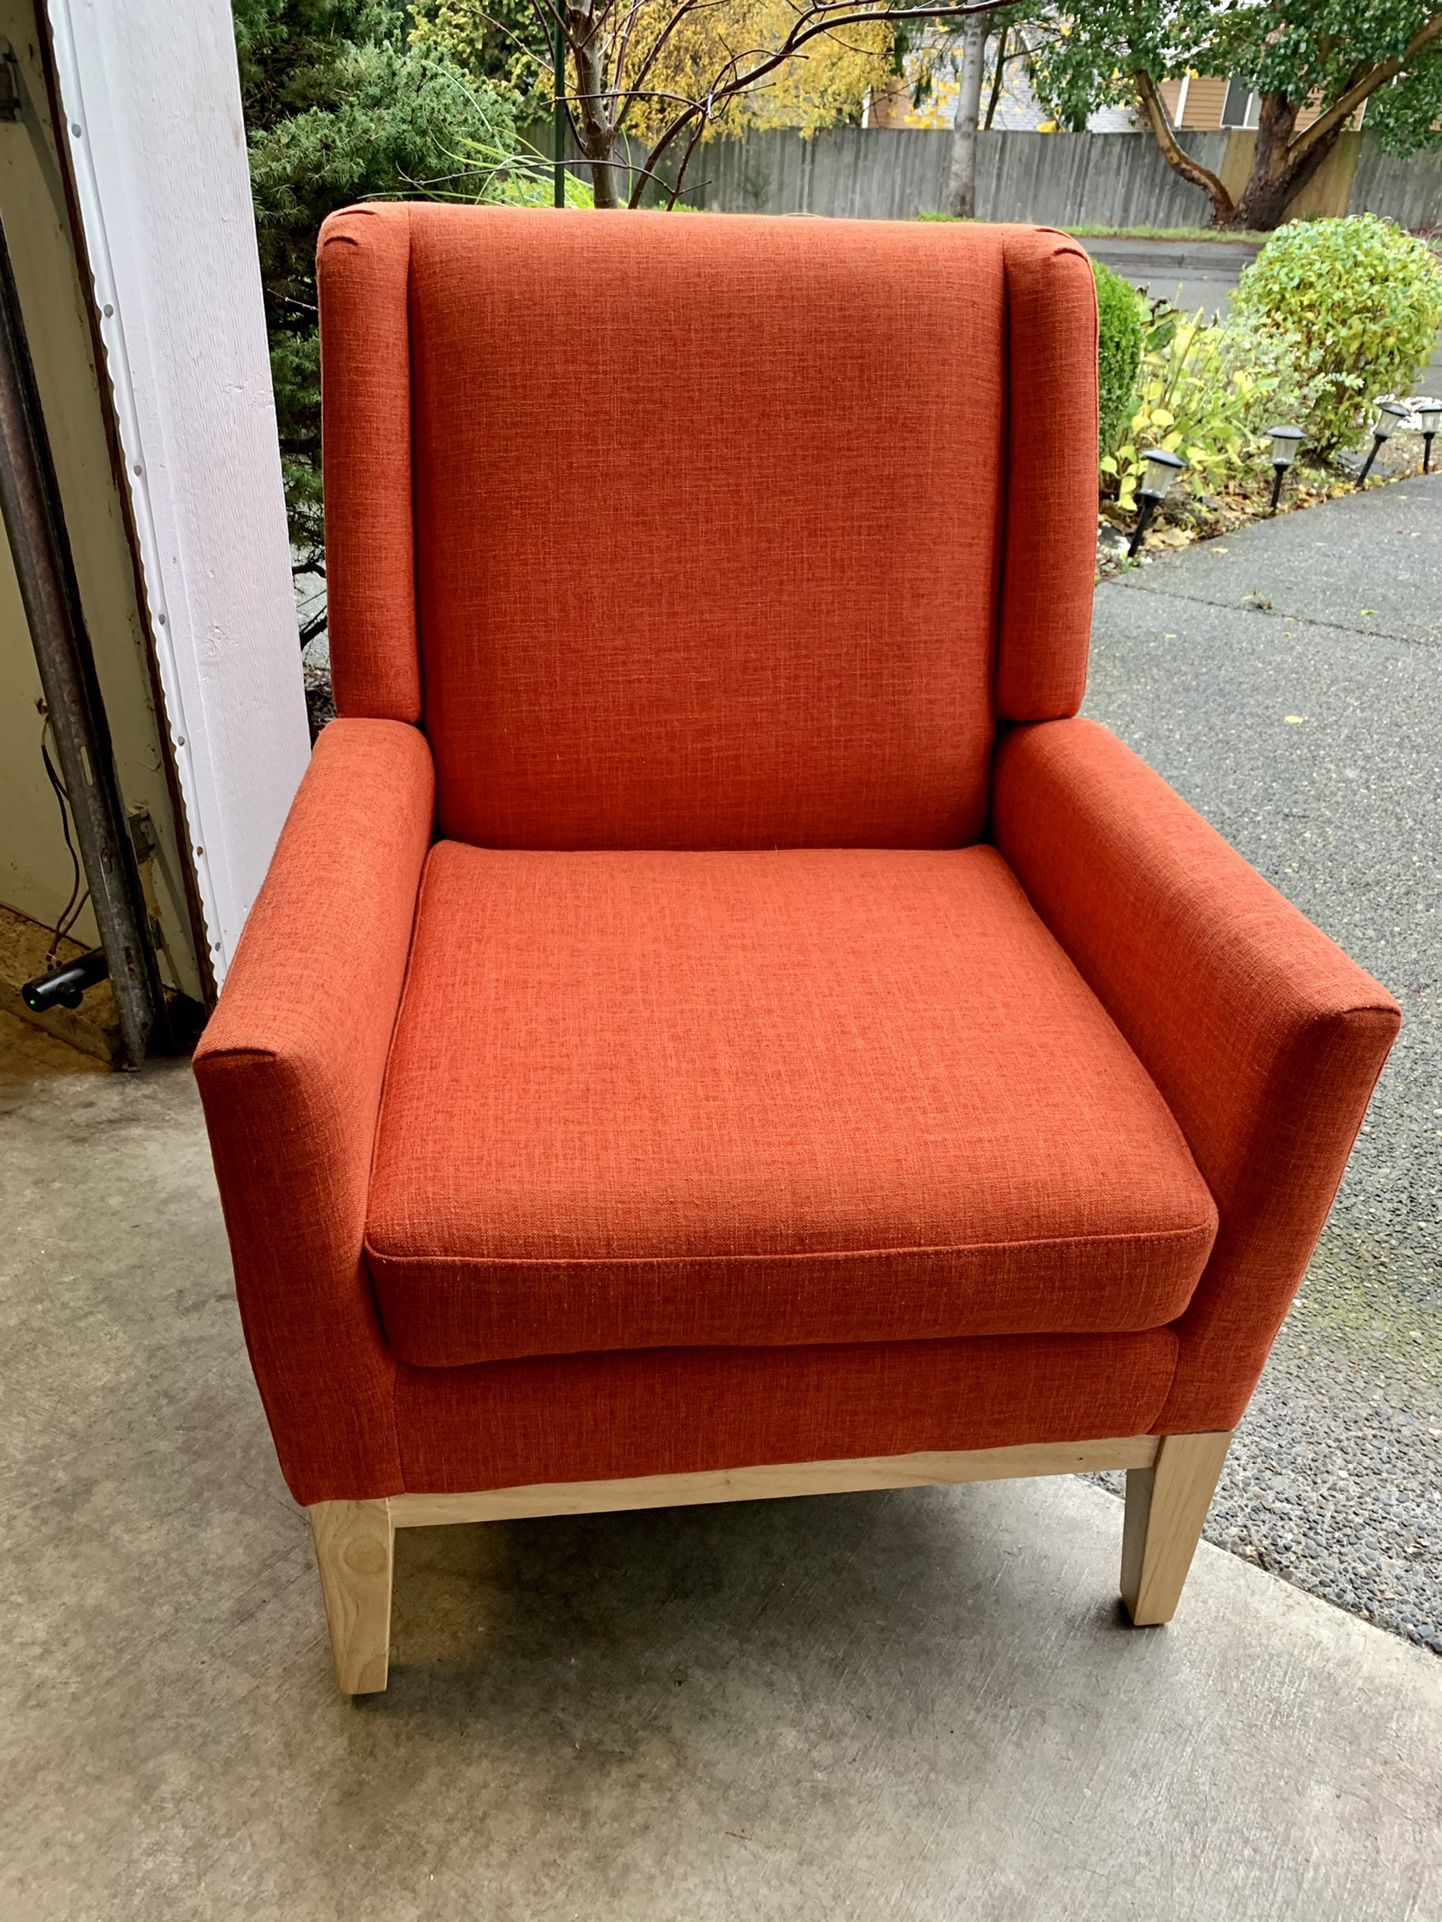 Beautiful Coral/ Reddish Fabric Accent Chair